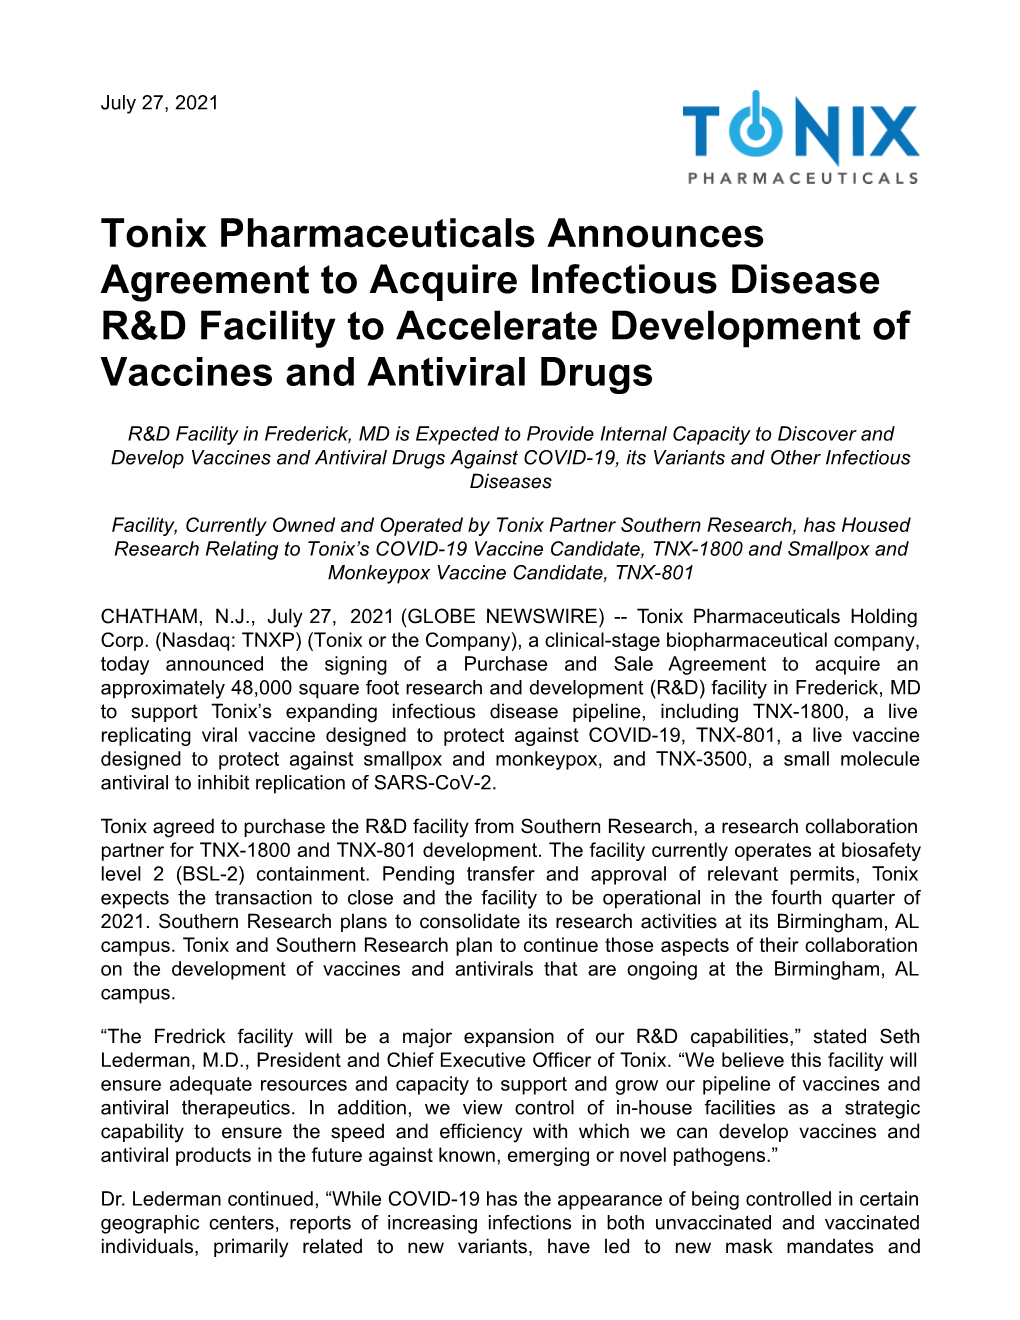 Tonix Pharmaceuticals Announces Agreement to Acquire Infectious Disease R&D Facility to Accelerate Development of Vaccines and Antiviral Drugs